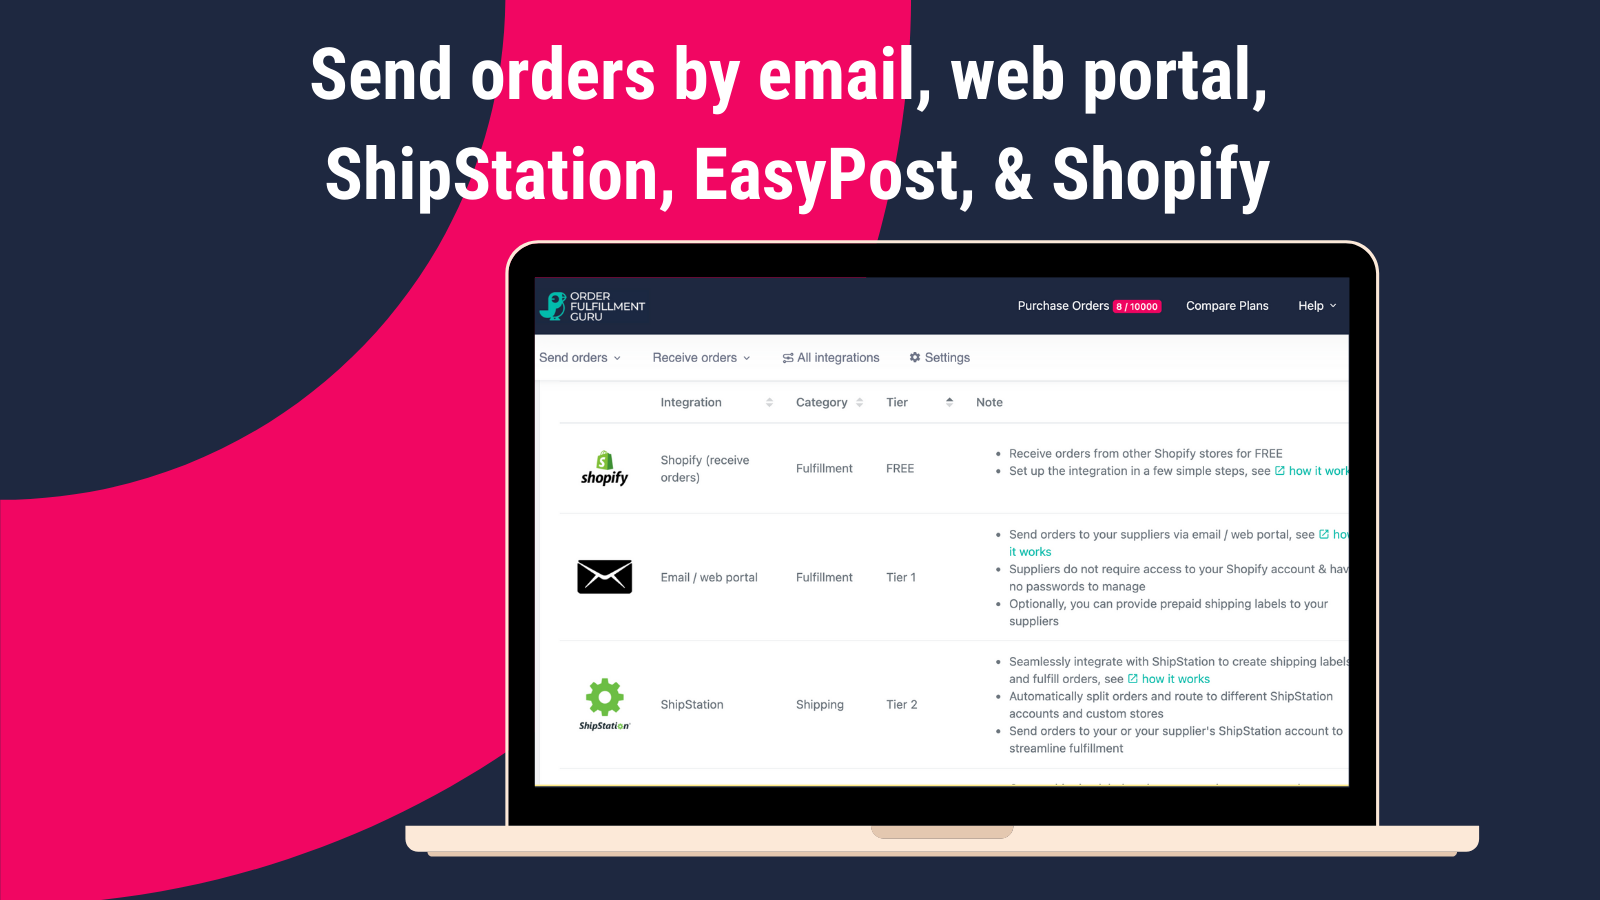 Send orders by email, web portal, ShipStation, & Shopify